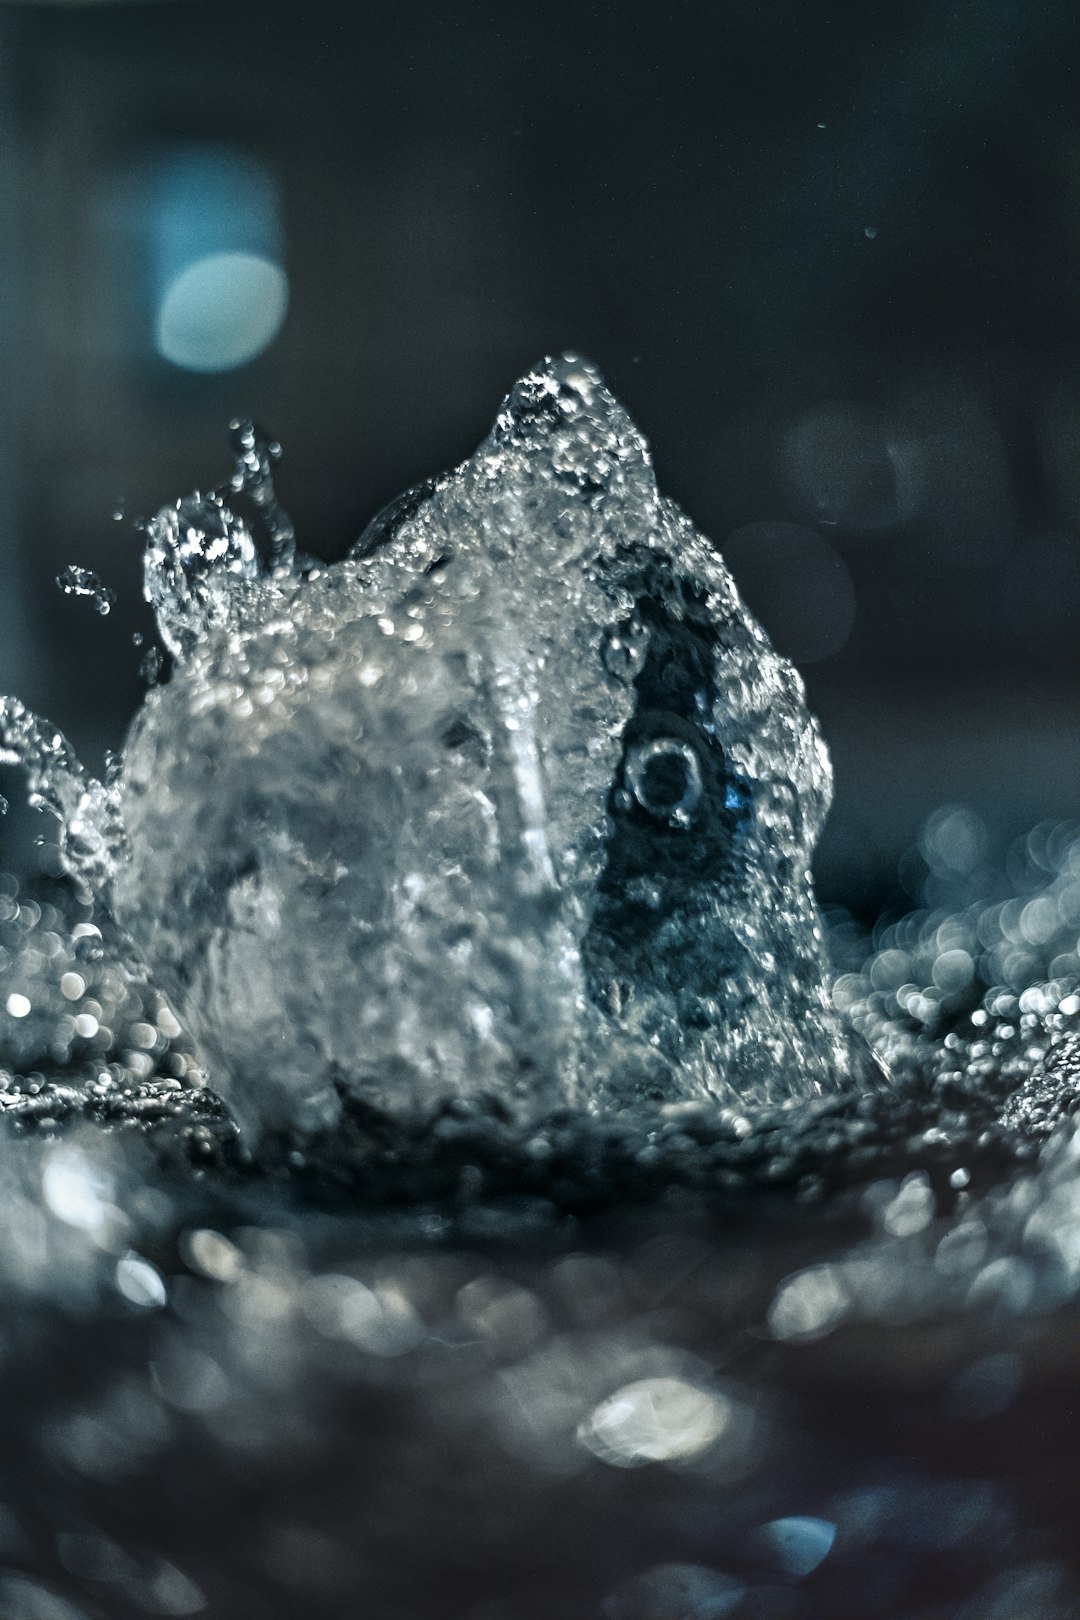 water splash in close up photography